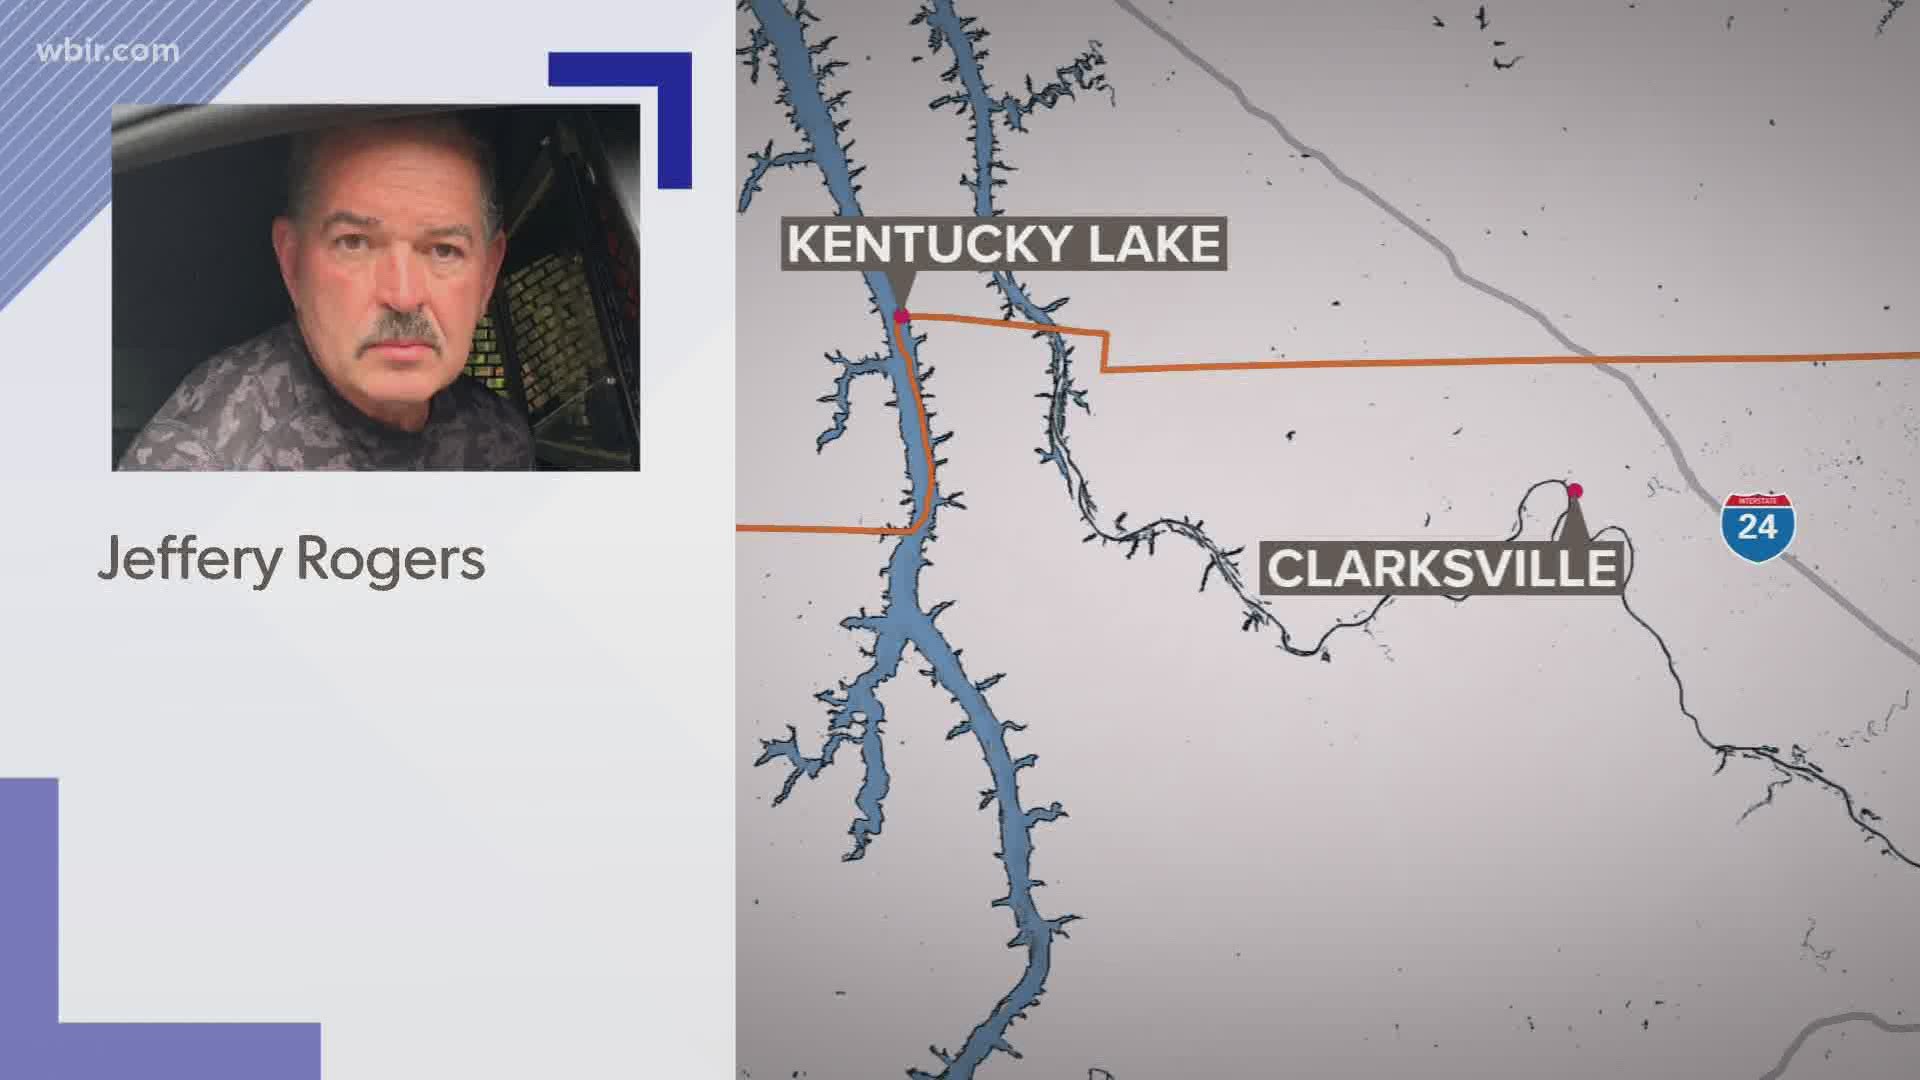 The Tennessee Bureau of Investigation says Jeffery Rogers used a rented boat to dispose of the body in Kentucky Lake.